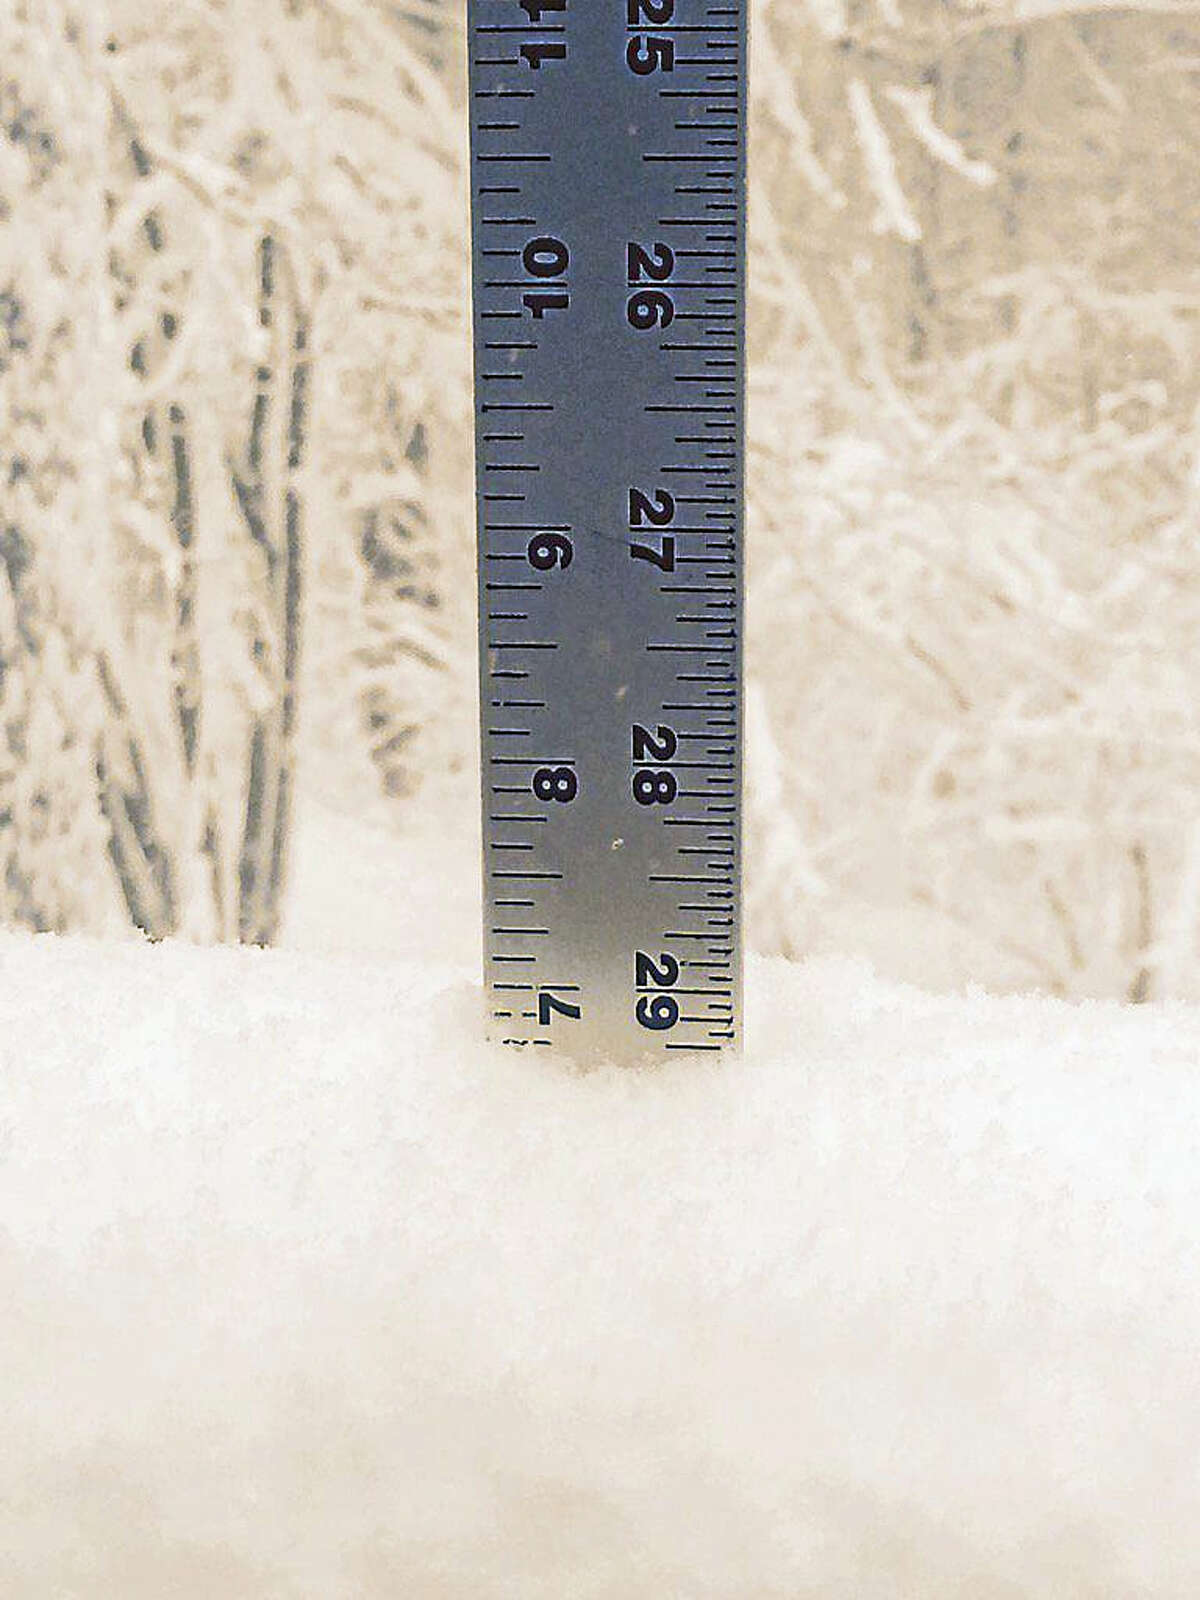 This was the snow total in Killingworth, Connecticut, as of 11 a.m. Friday, Feb. 5, 2016.